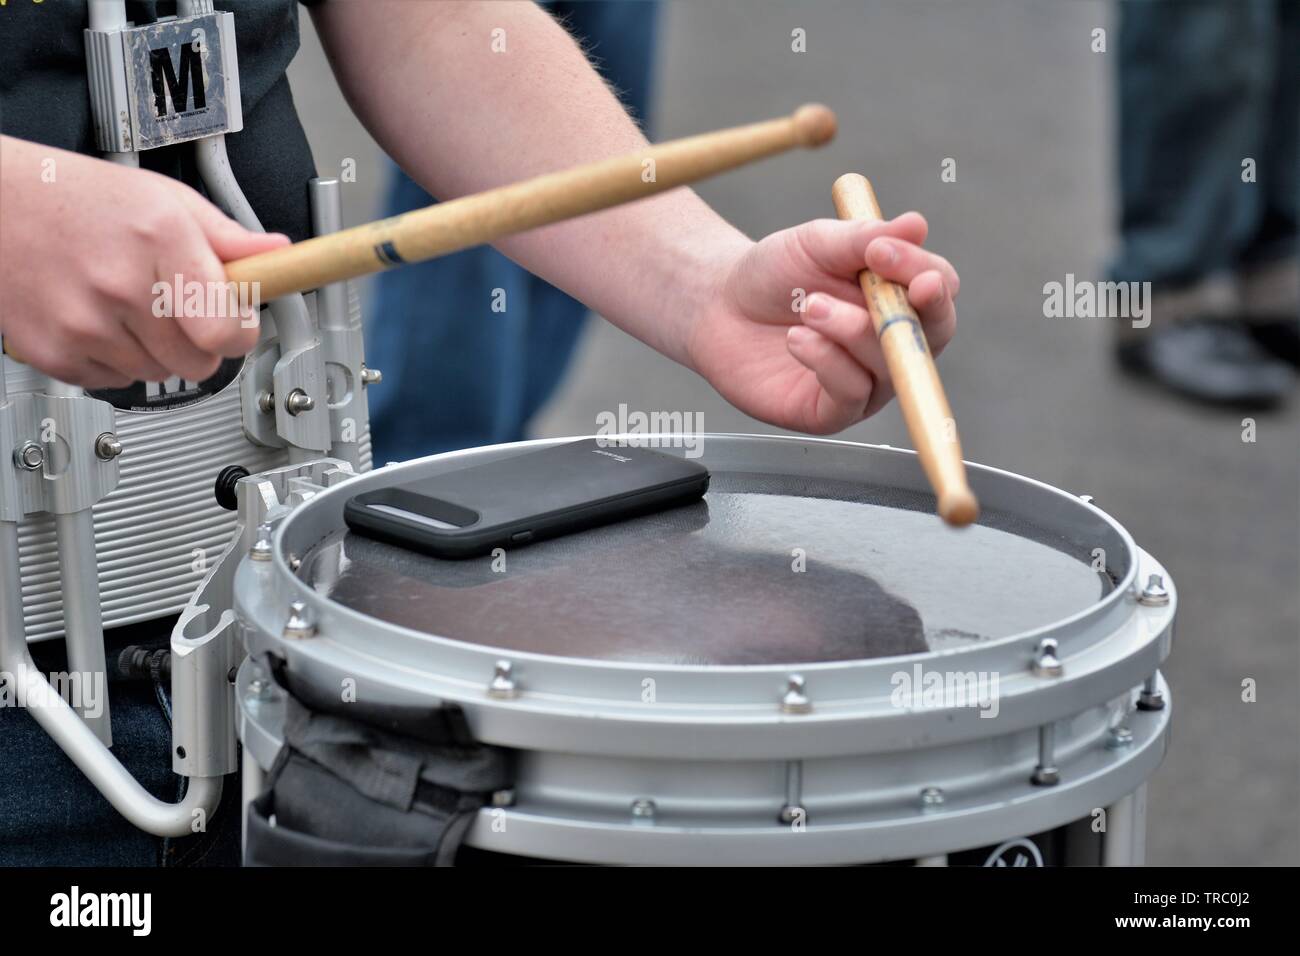 A drummer in a real high school band with his cell phone on the drum as he plays vibration, connected Stock Photo